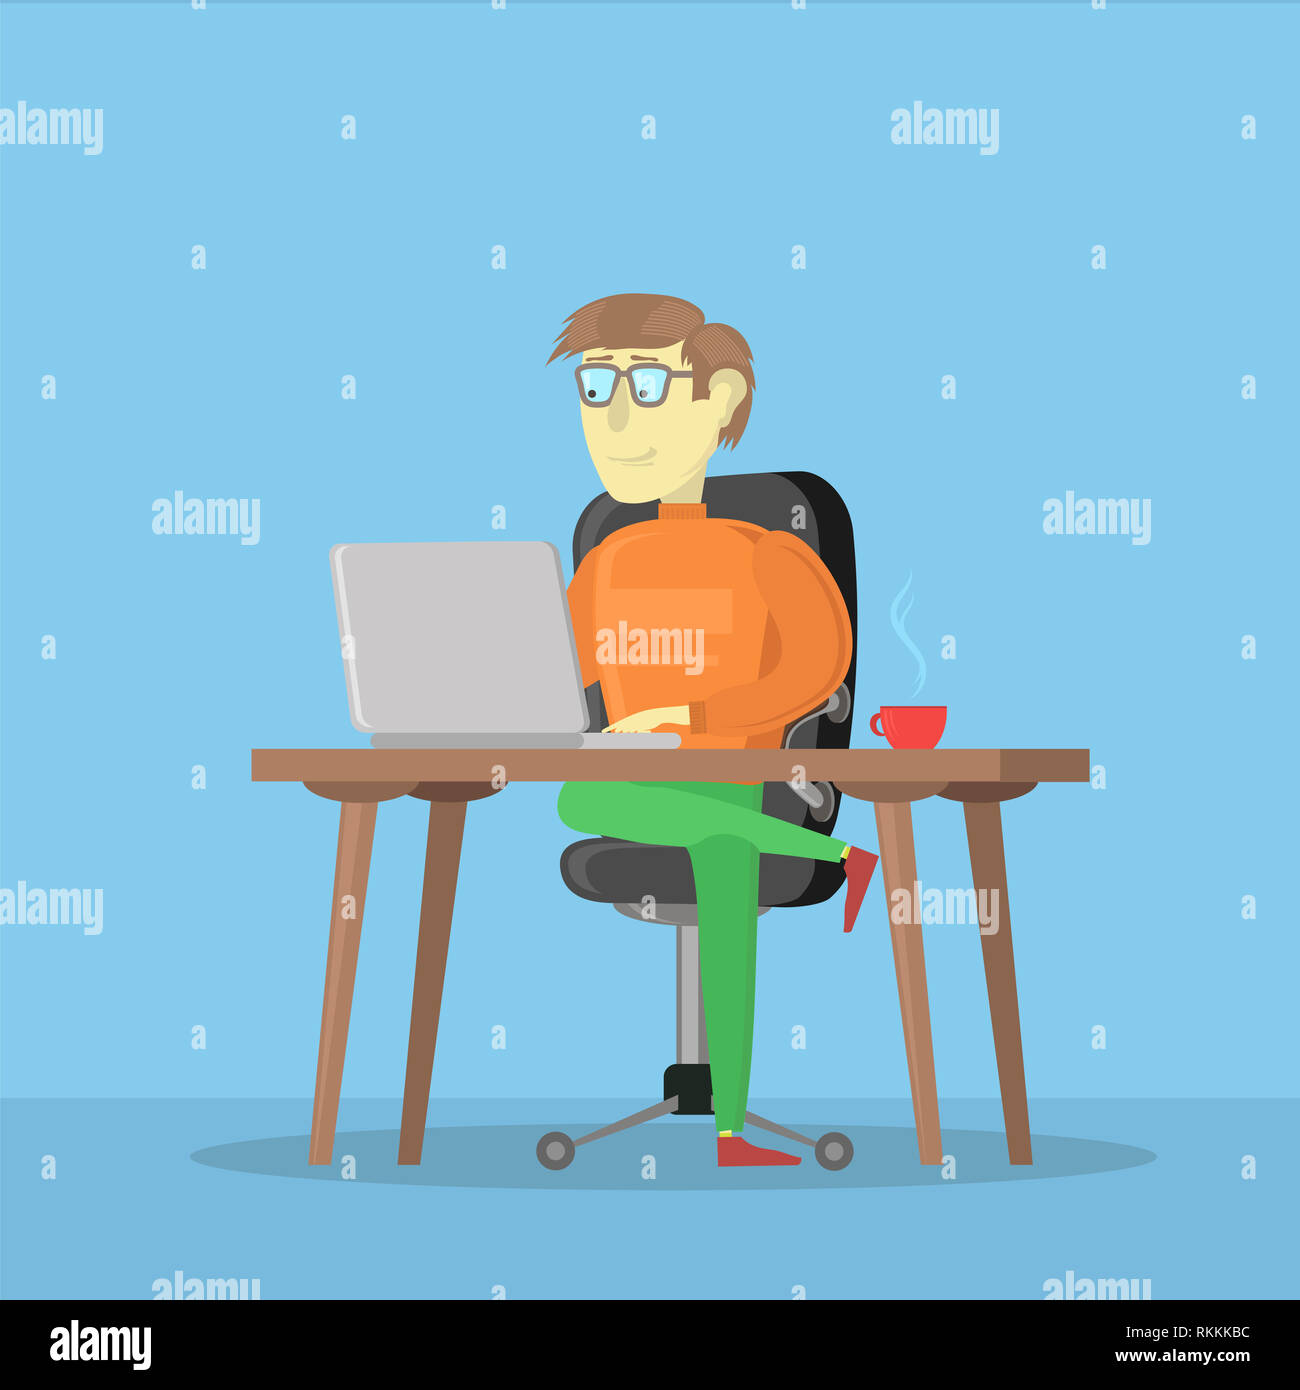 Man Working on a Laptop Computer. Male Business Cartoon Character. Freelancer and His Work Process Icon. Freelance Job. Stock Photo